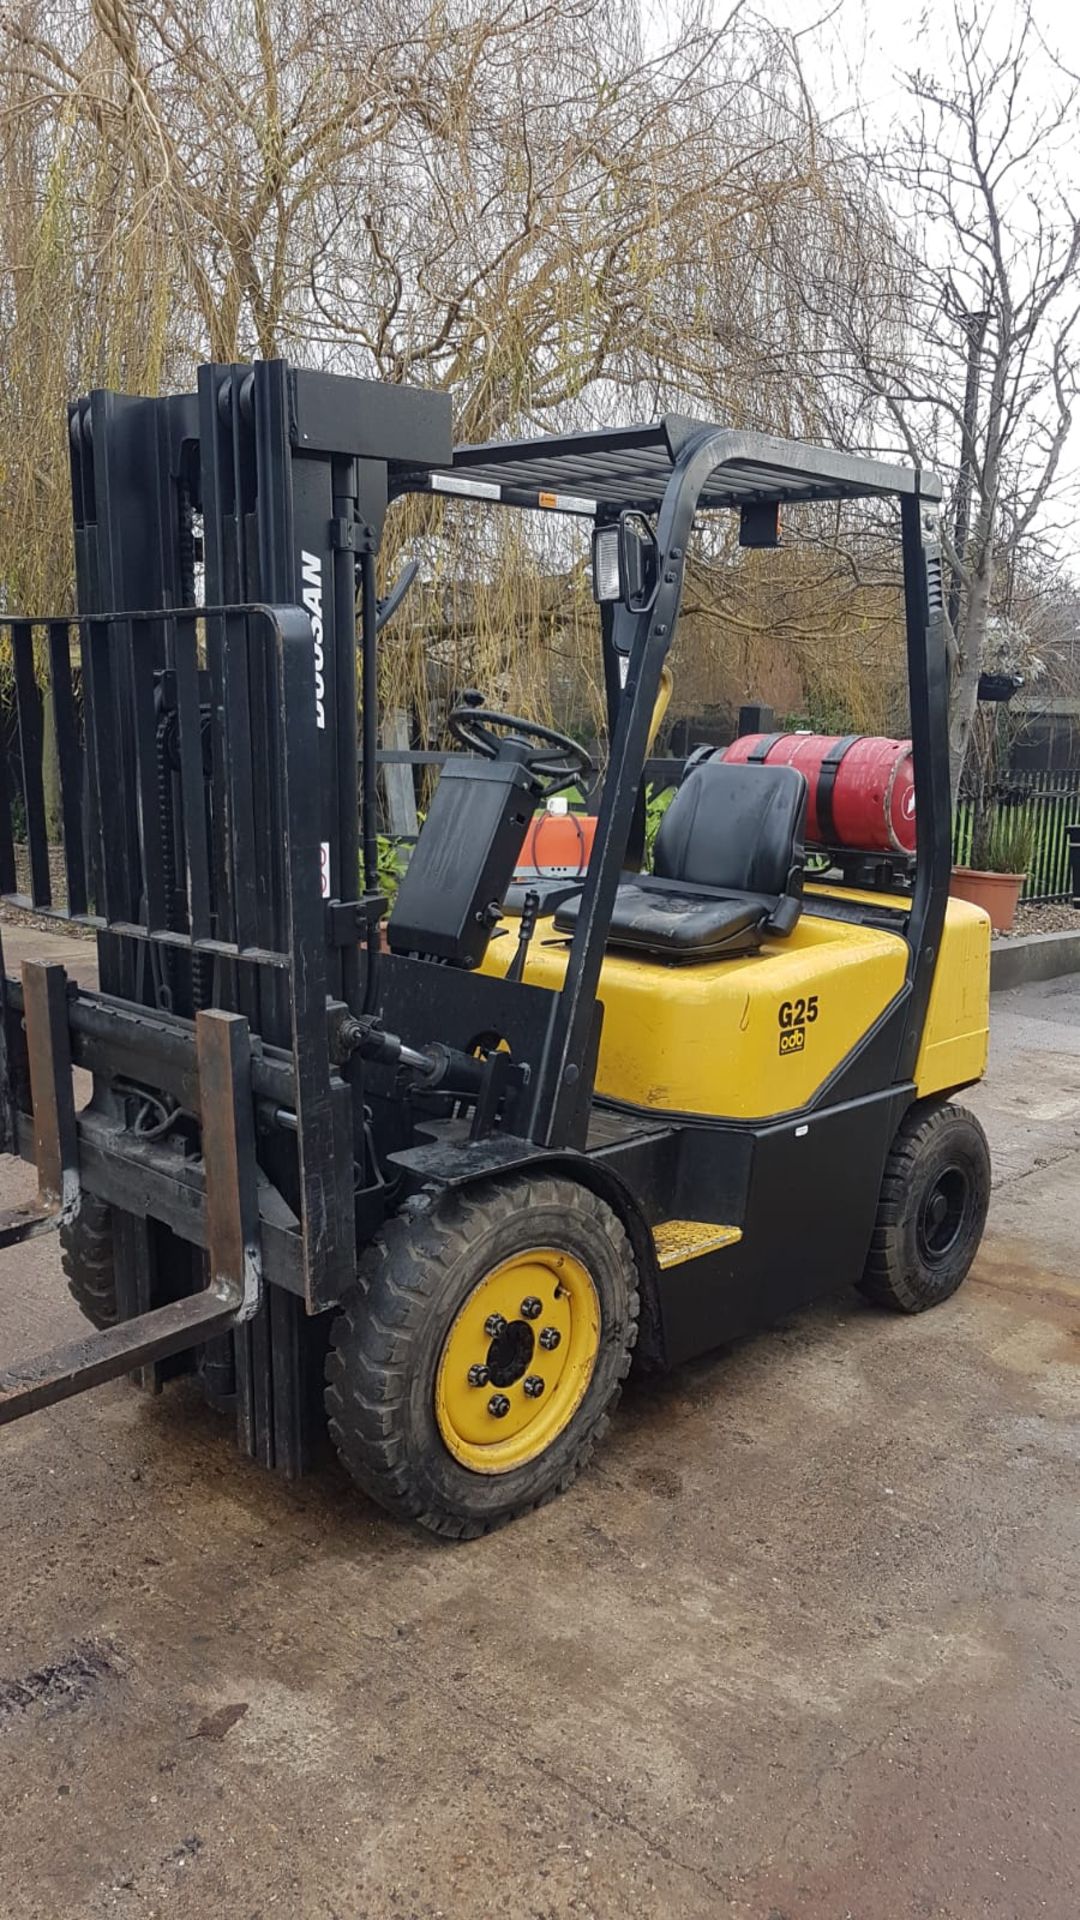 DAEWOO G25 GAS POWERED FORKLIFT TRUCK, 3 STAGE TRIPLE MAST, SIDE SHIFT, 2.5 TONNE RATED CAPACITY. - Image 3 of 4